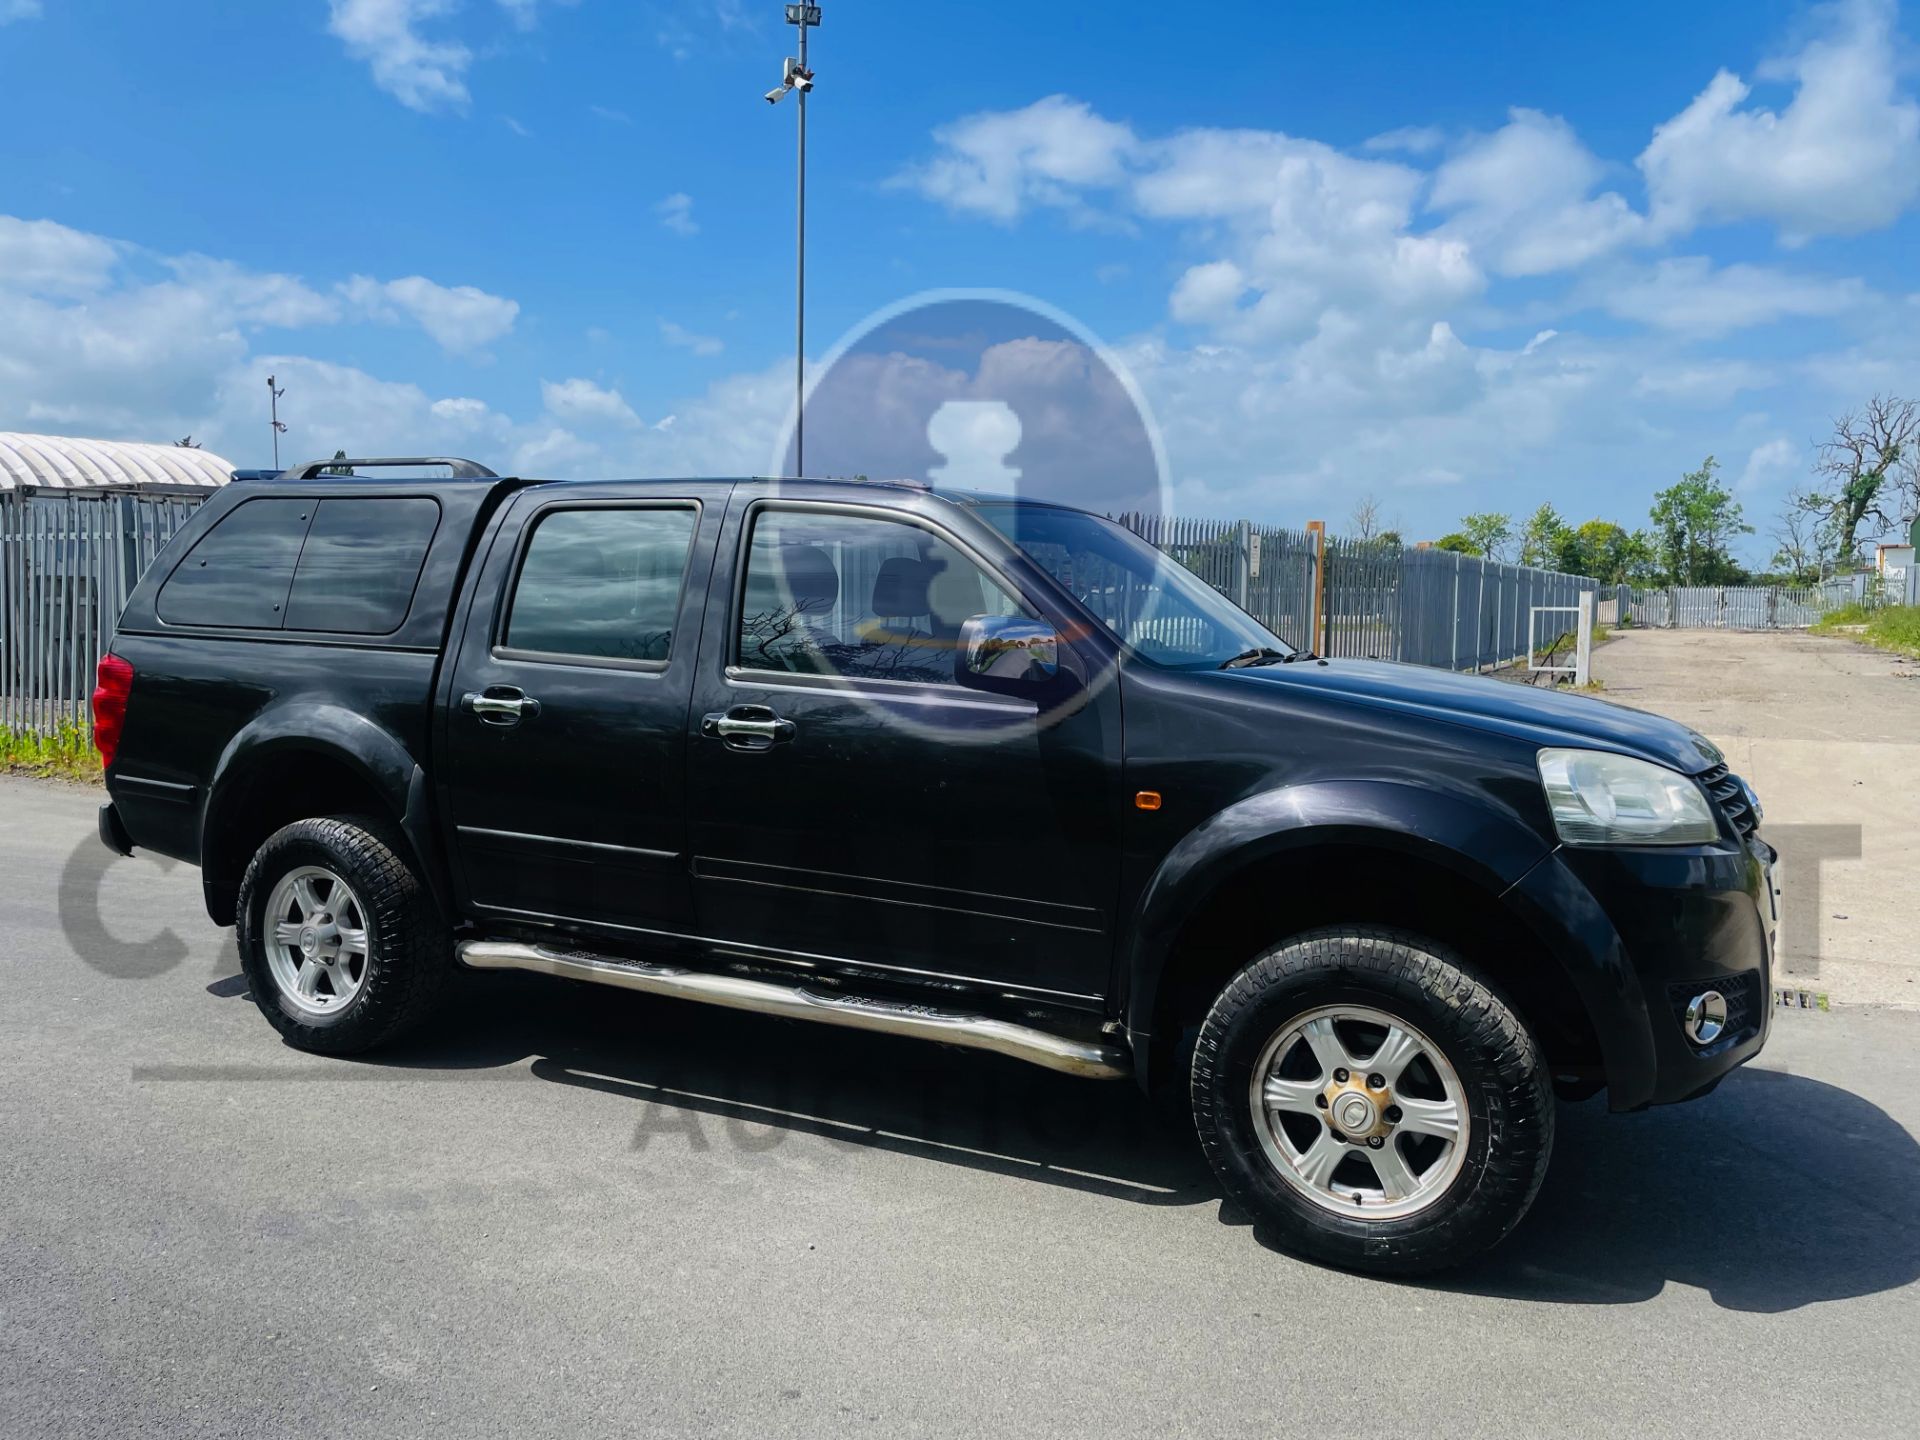 (On Sale) GREAT WALL STEED *SE* 4X4 DOUBLE CAB PICK-UP (2012) 2.0 DIESEL - 6 SPEED *HUGE SPEC* - Image 11 of 45